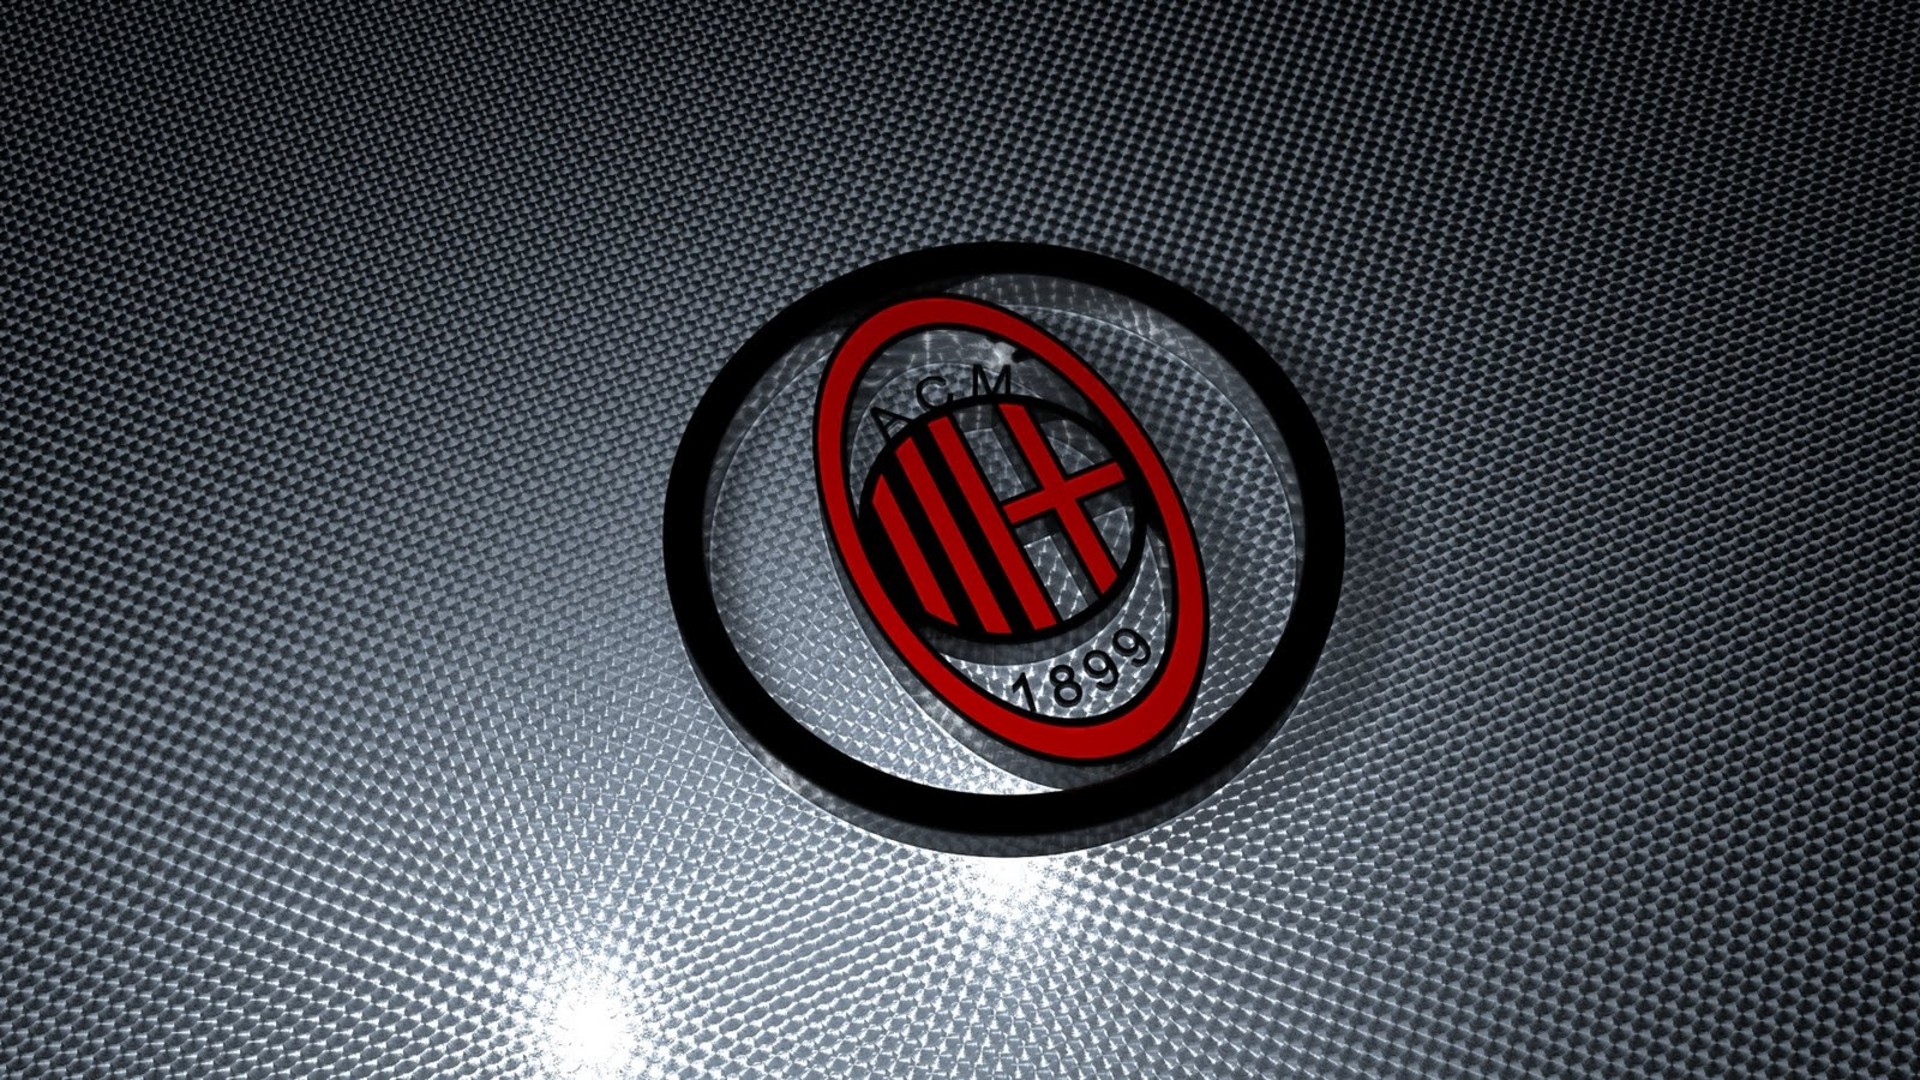 Wallpapers HD AC Milan With high-resolution 1920X1080 pixel. You can use this wallpaper for your Desktop Computers, Mac Screensavers, Windows Backgrounds, iPhone Wallpapers, Tablet or Android Lock screen and another Mobile device